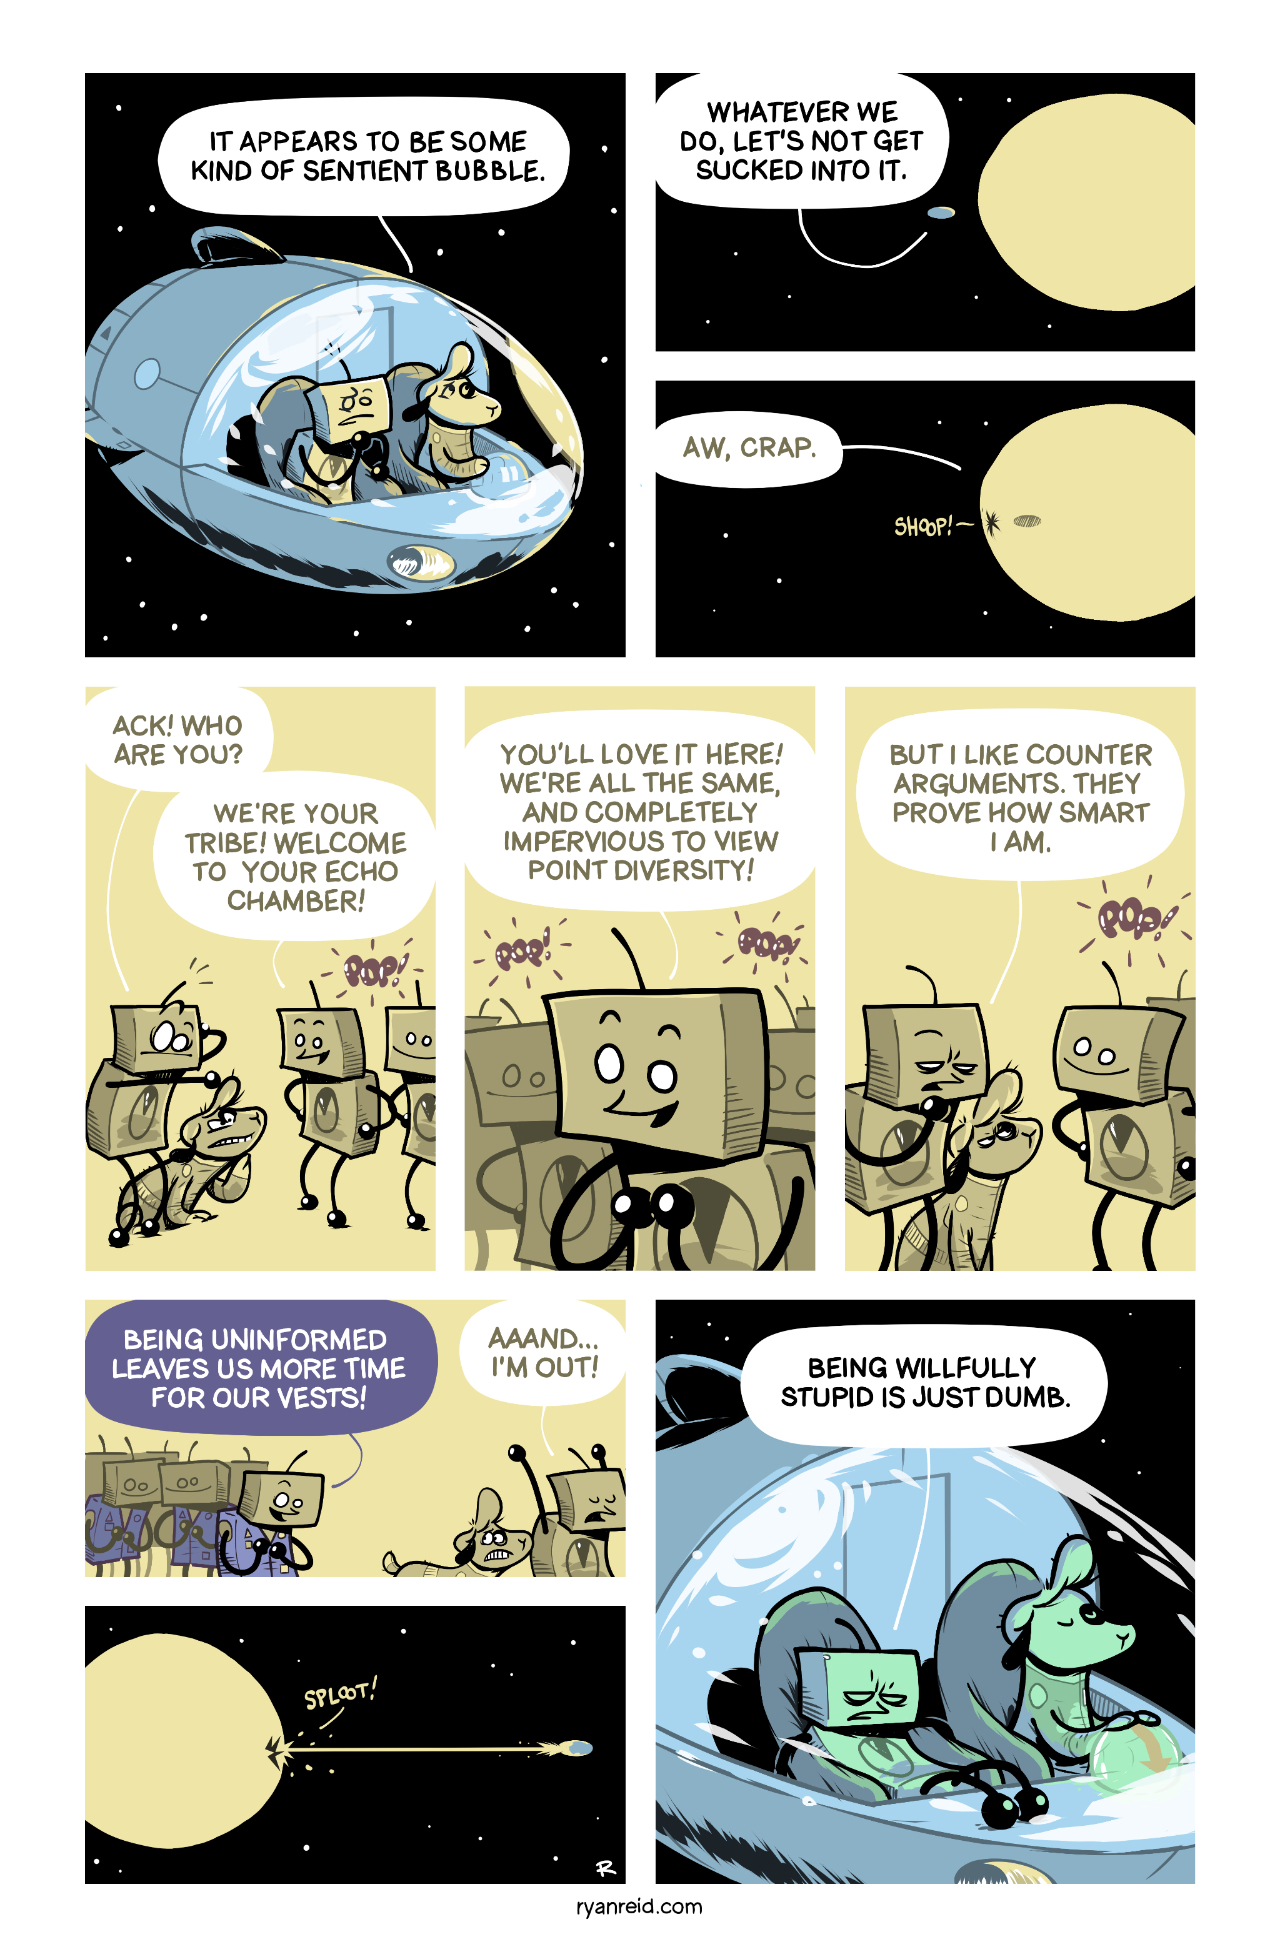 In this comic, Robot and Francis the Sheep get sucked into an echo chamber, and find it’s not at all to their liking.